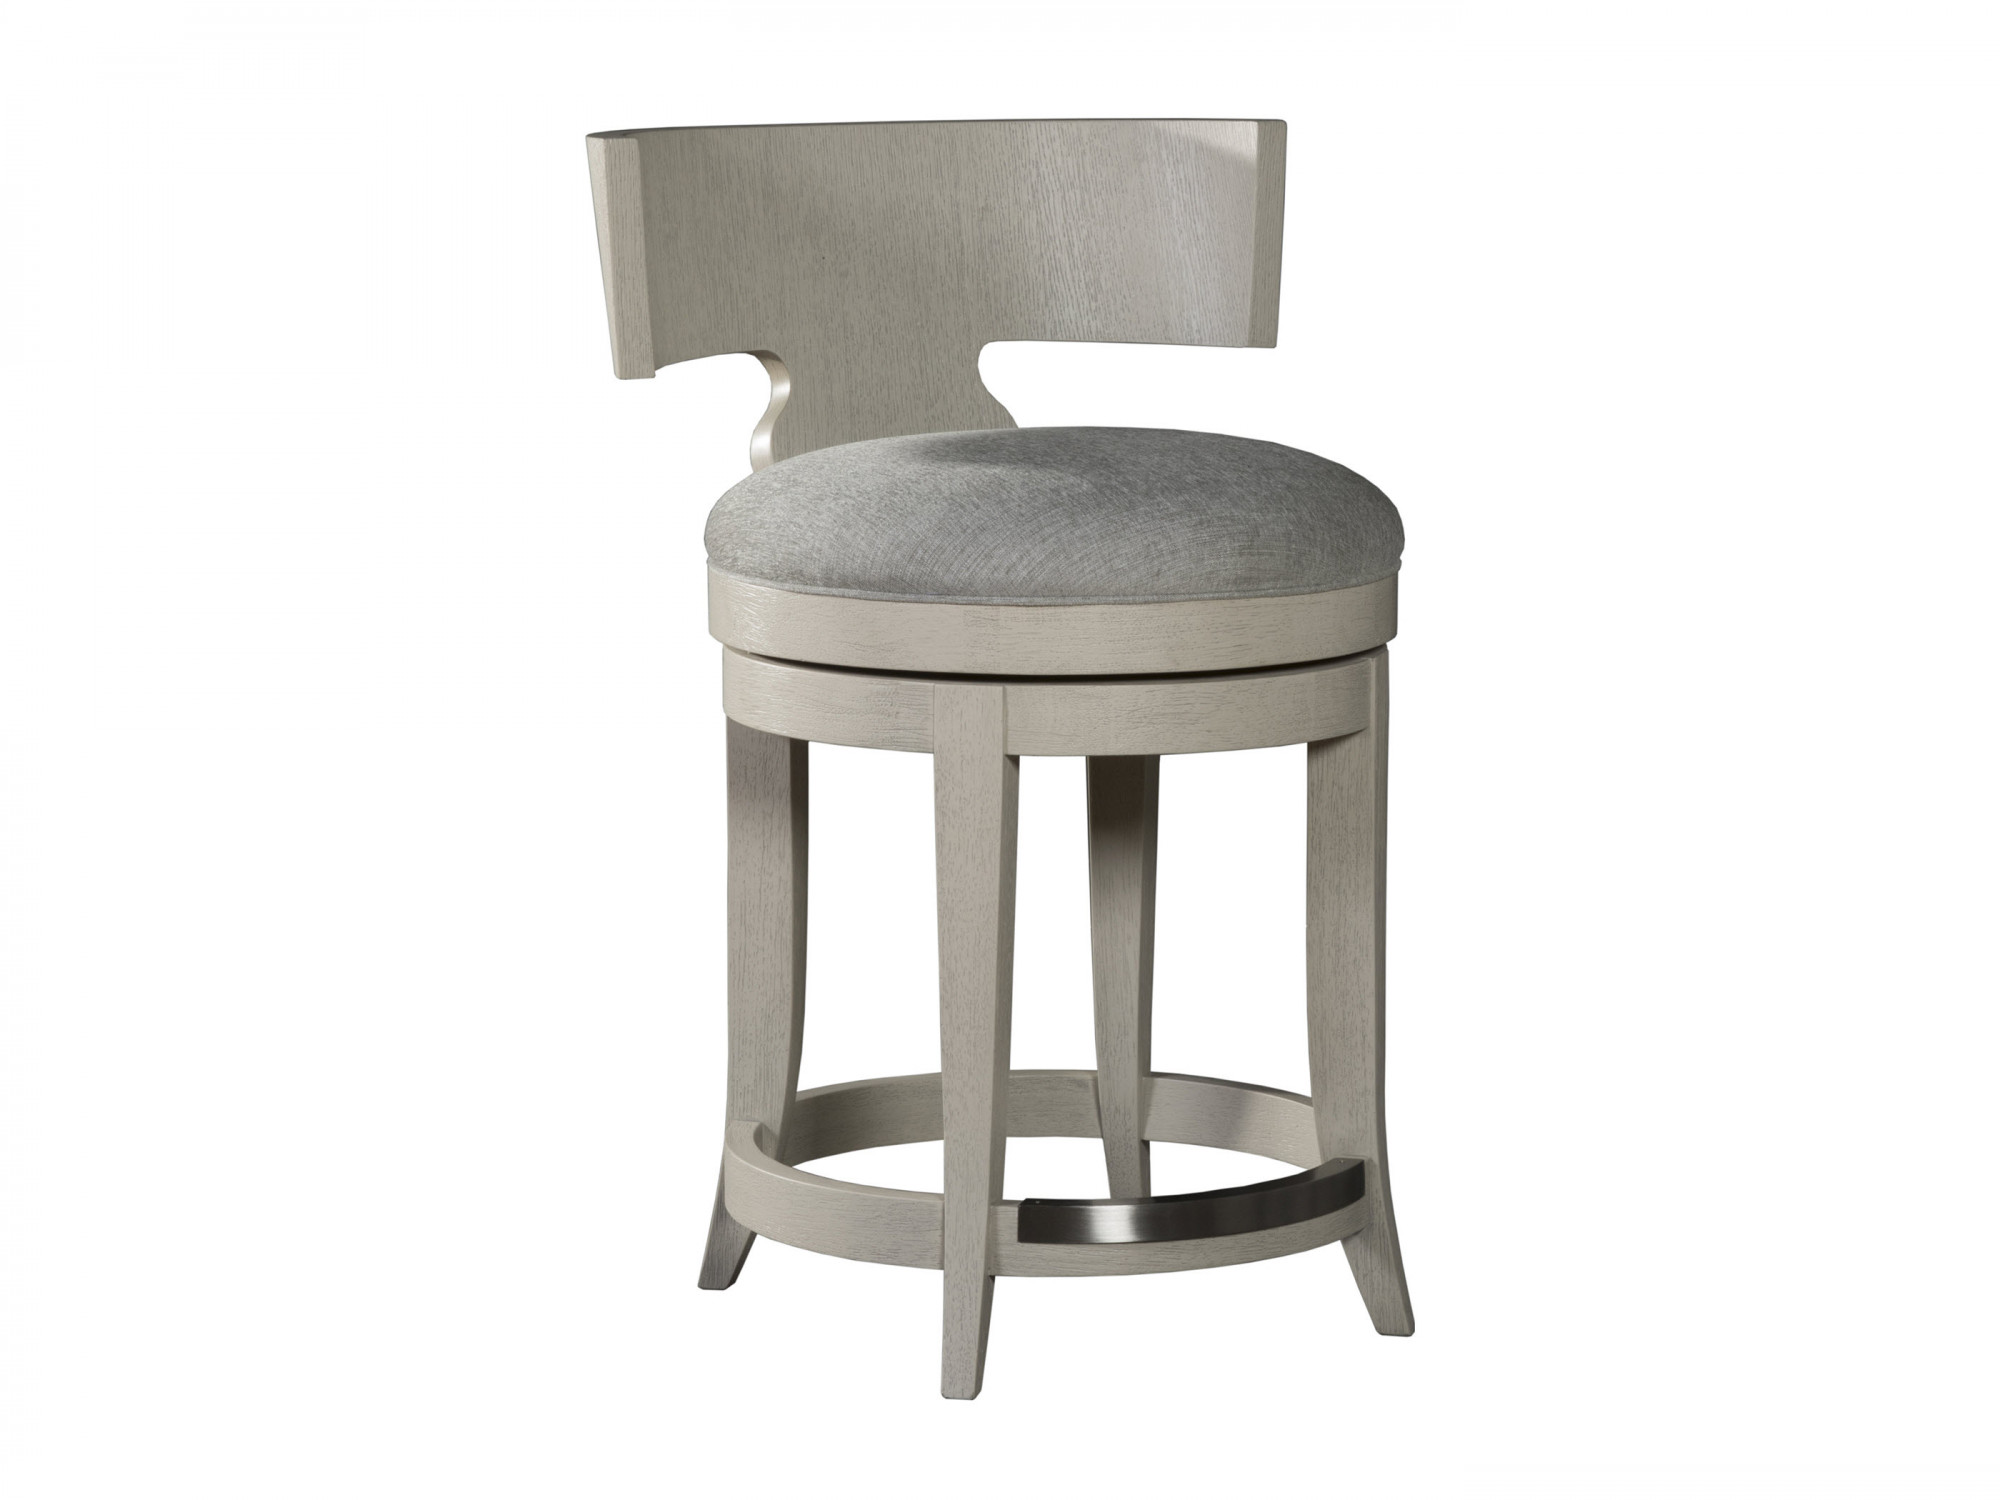 Fuente Swivel Counter Stool, Oyster Bay Bar Stools